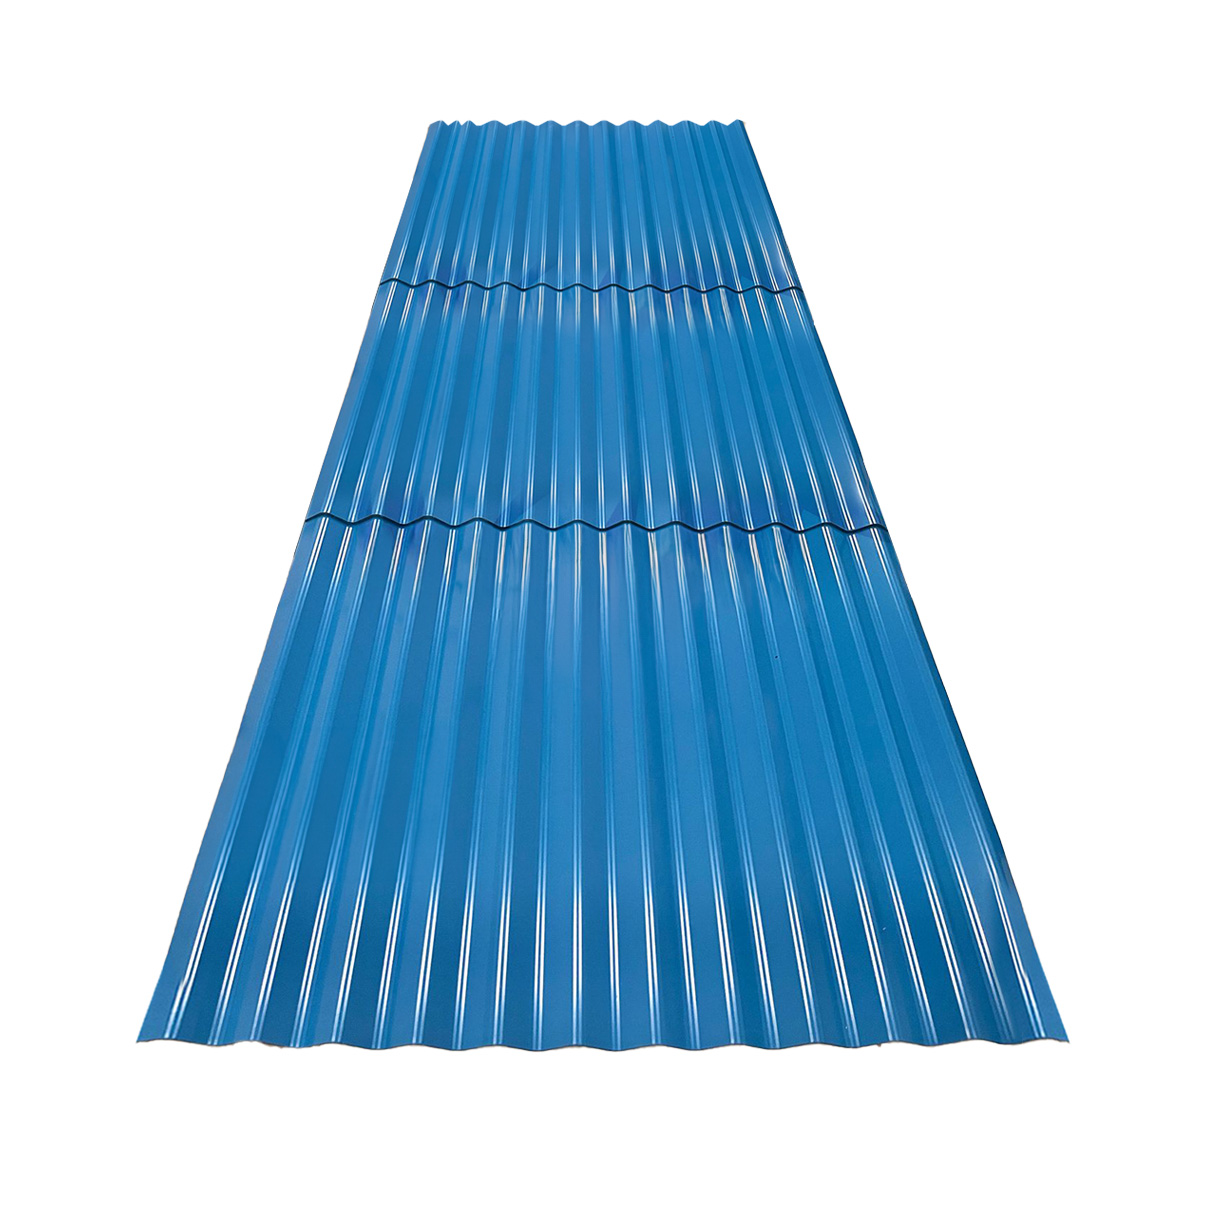 Corrugated 914 Roofing Sheet in Colour Sky Blue Gloss Finish